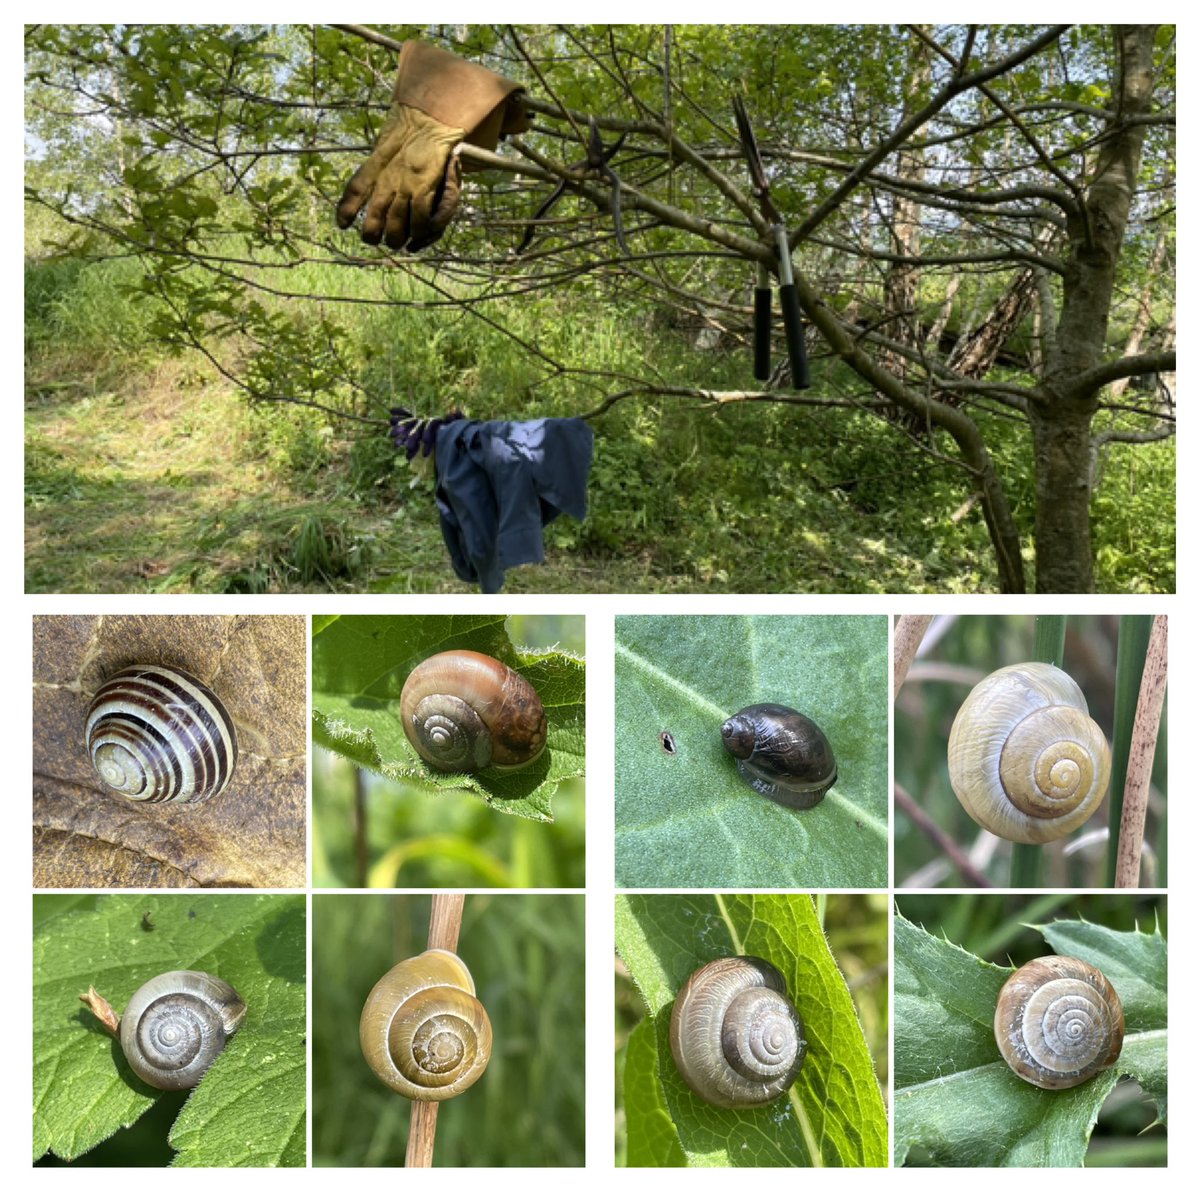 Still taking life at #recovery/#snails pace - making progress, however slow! I enjoyed some #NatureGardening over the weekend, discovering friends amongst thistles and docks - that really had to go! Another friend, Mr Oak, looked after my stuff, offering shade and respite #Trees